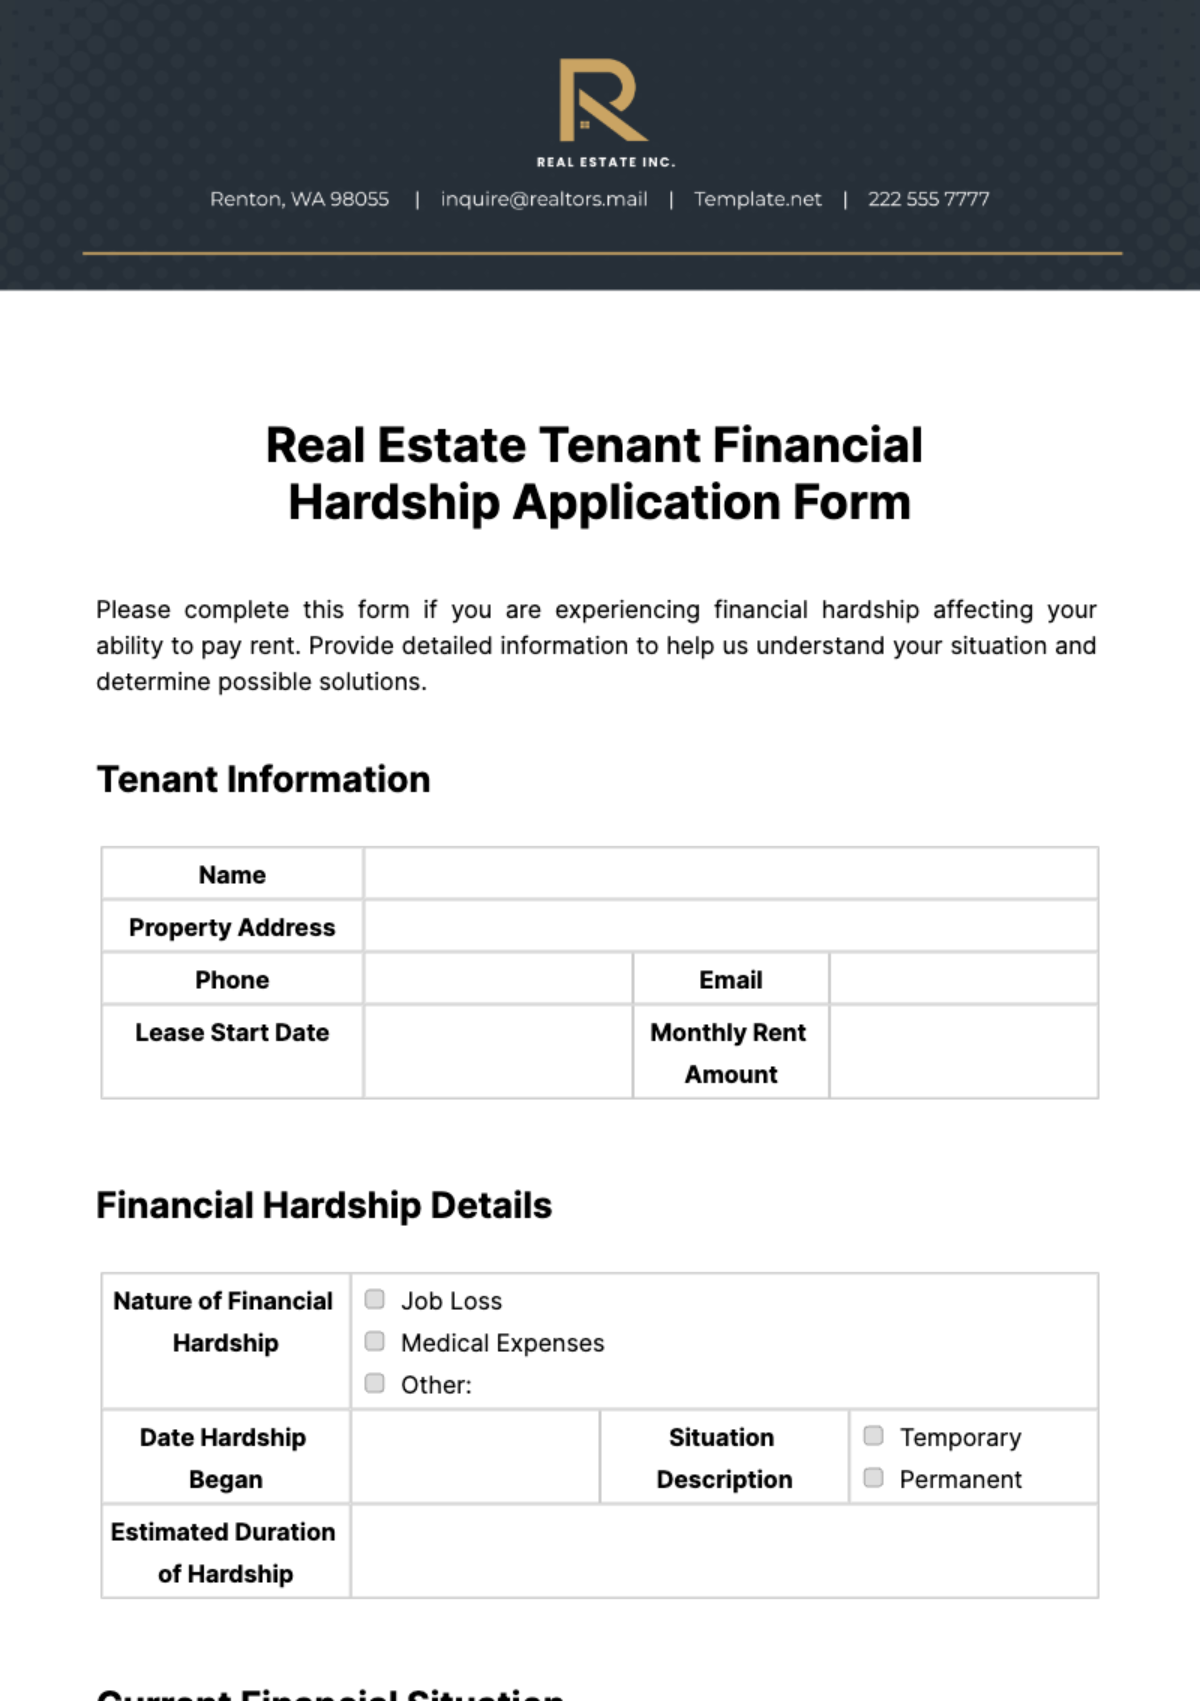 Free Real Estate Tenant Financial Hardship Application Form Template